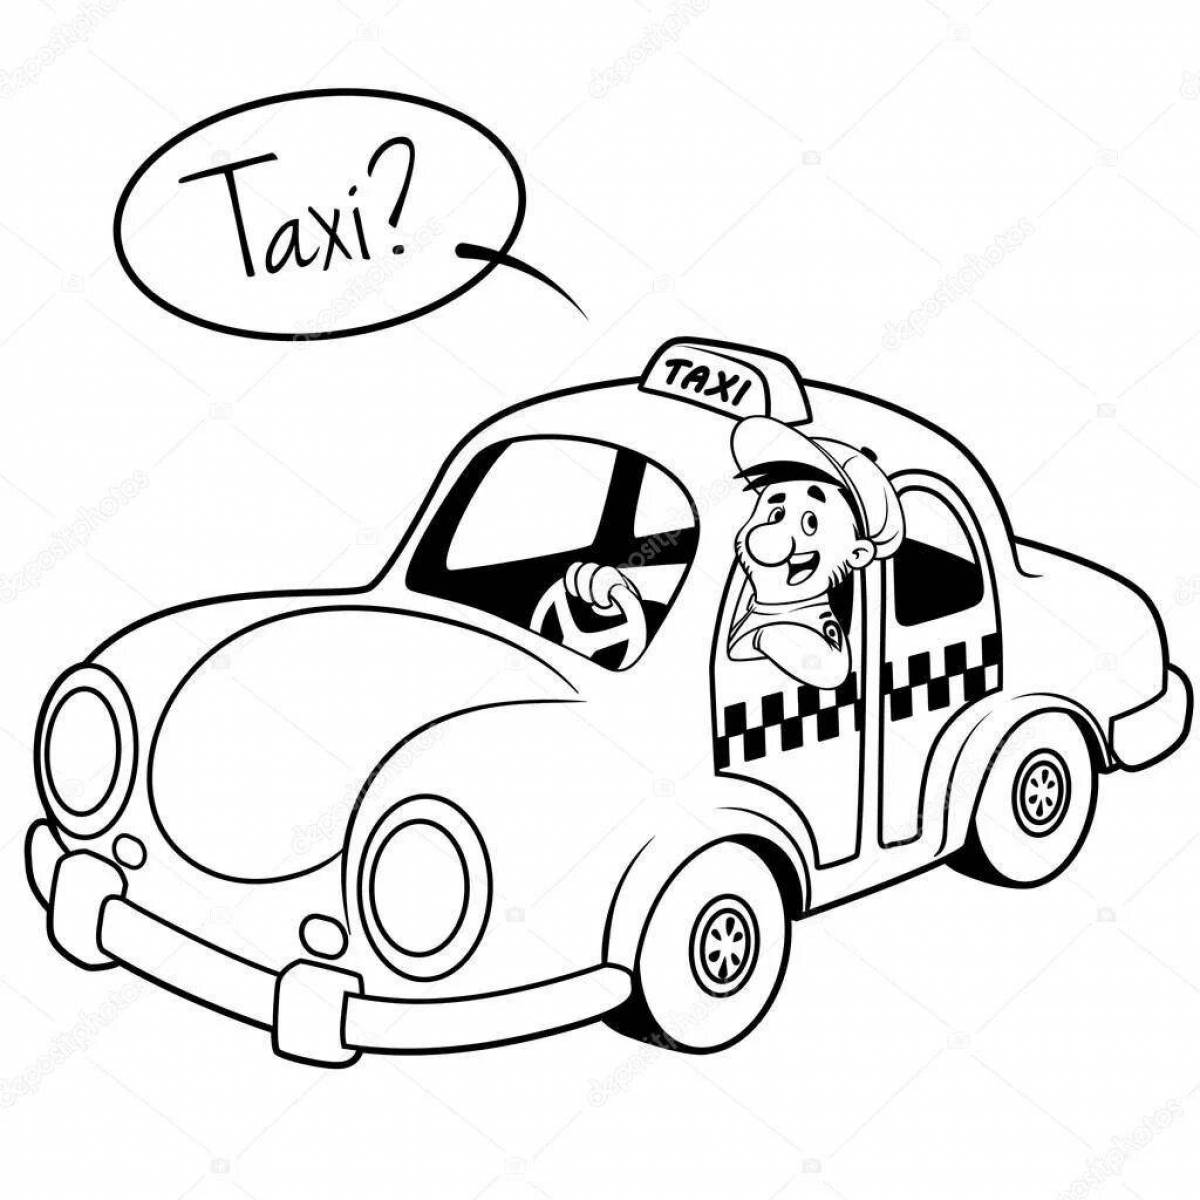 Amazing taxi coloring pages for kids